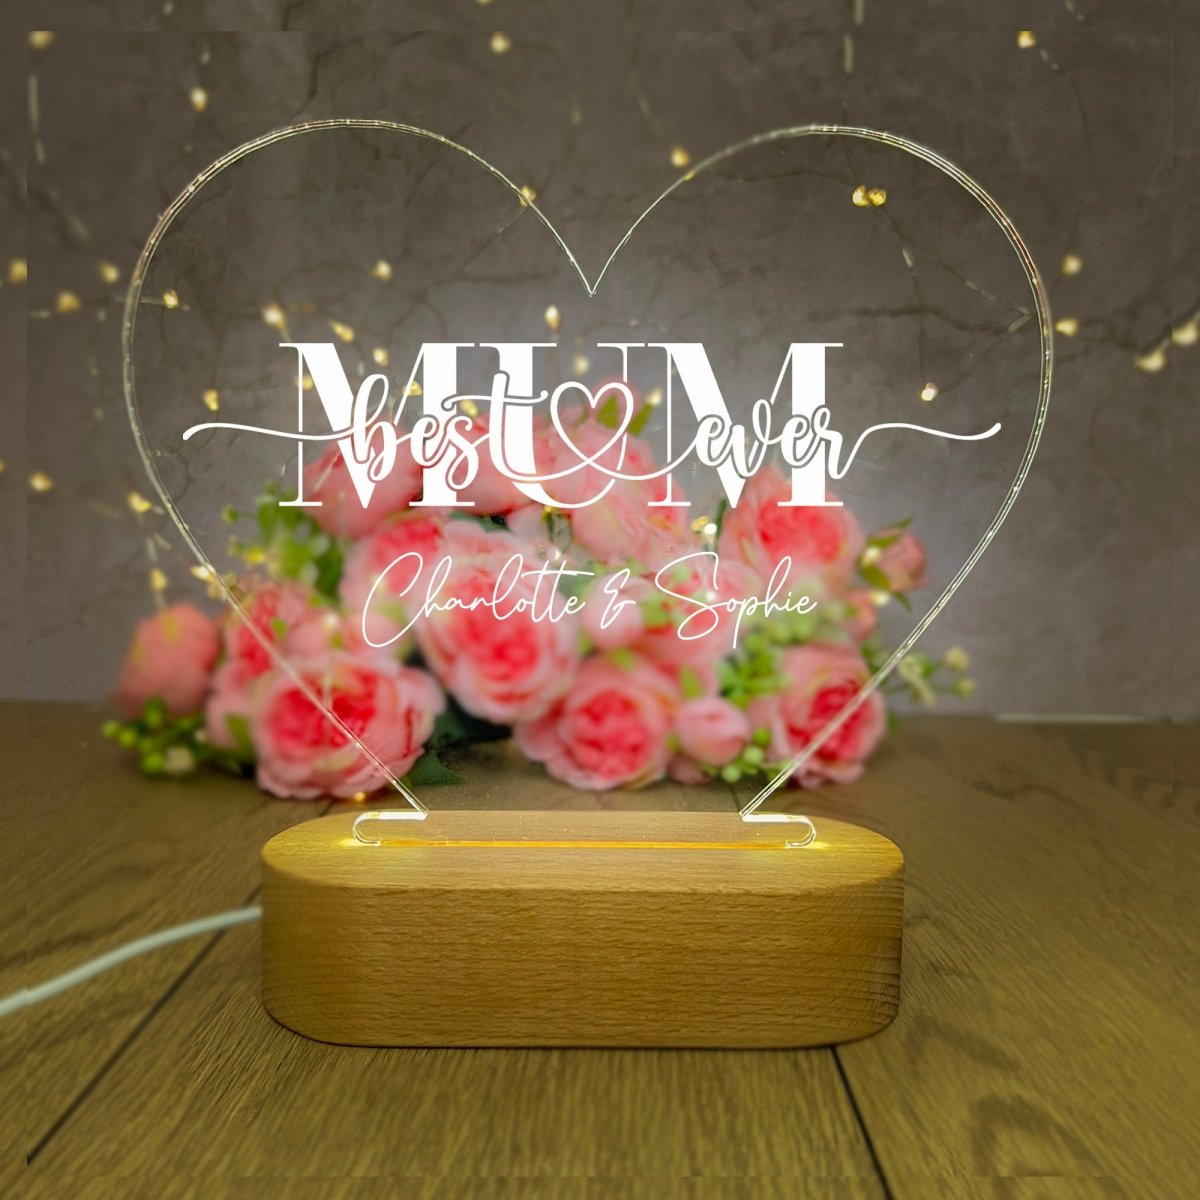 Personalised Gifts For Mum | Best Mum Ever Heart | LED Lamp Night Light    Accessories Gifts UK